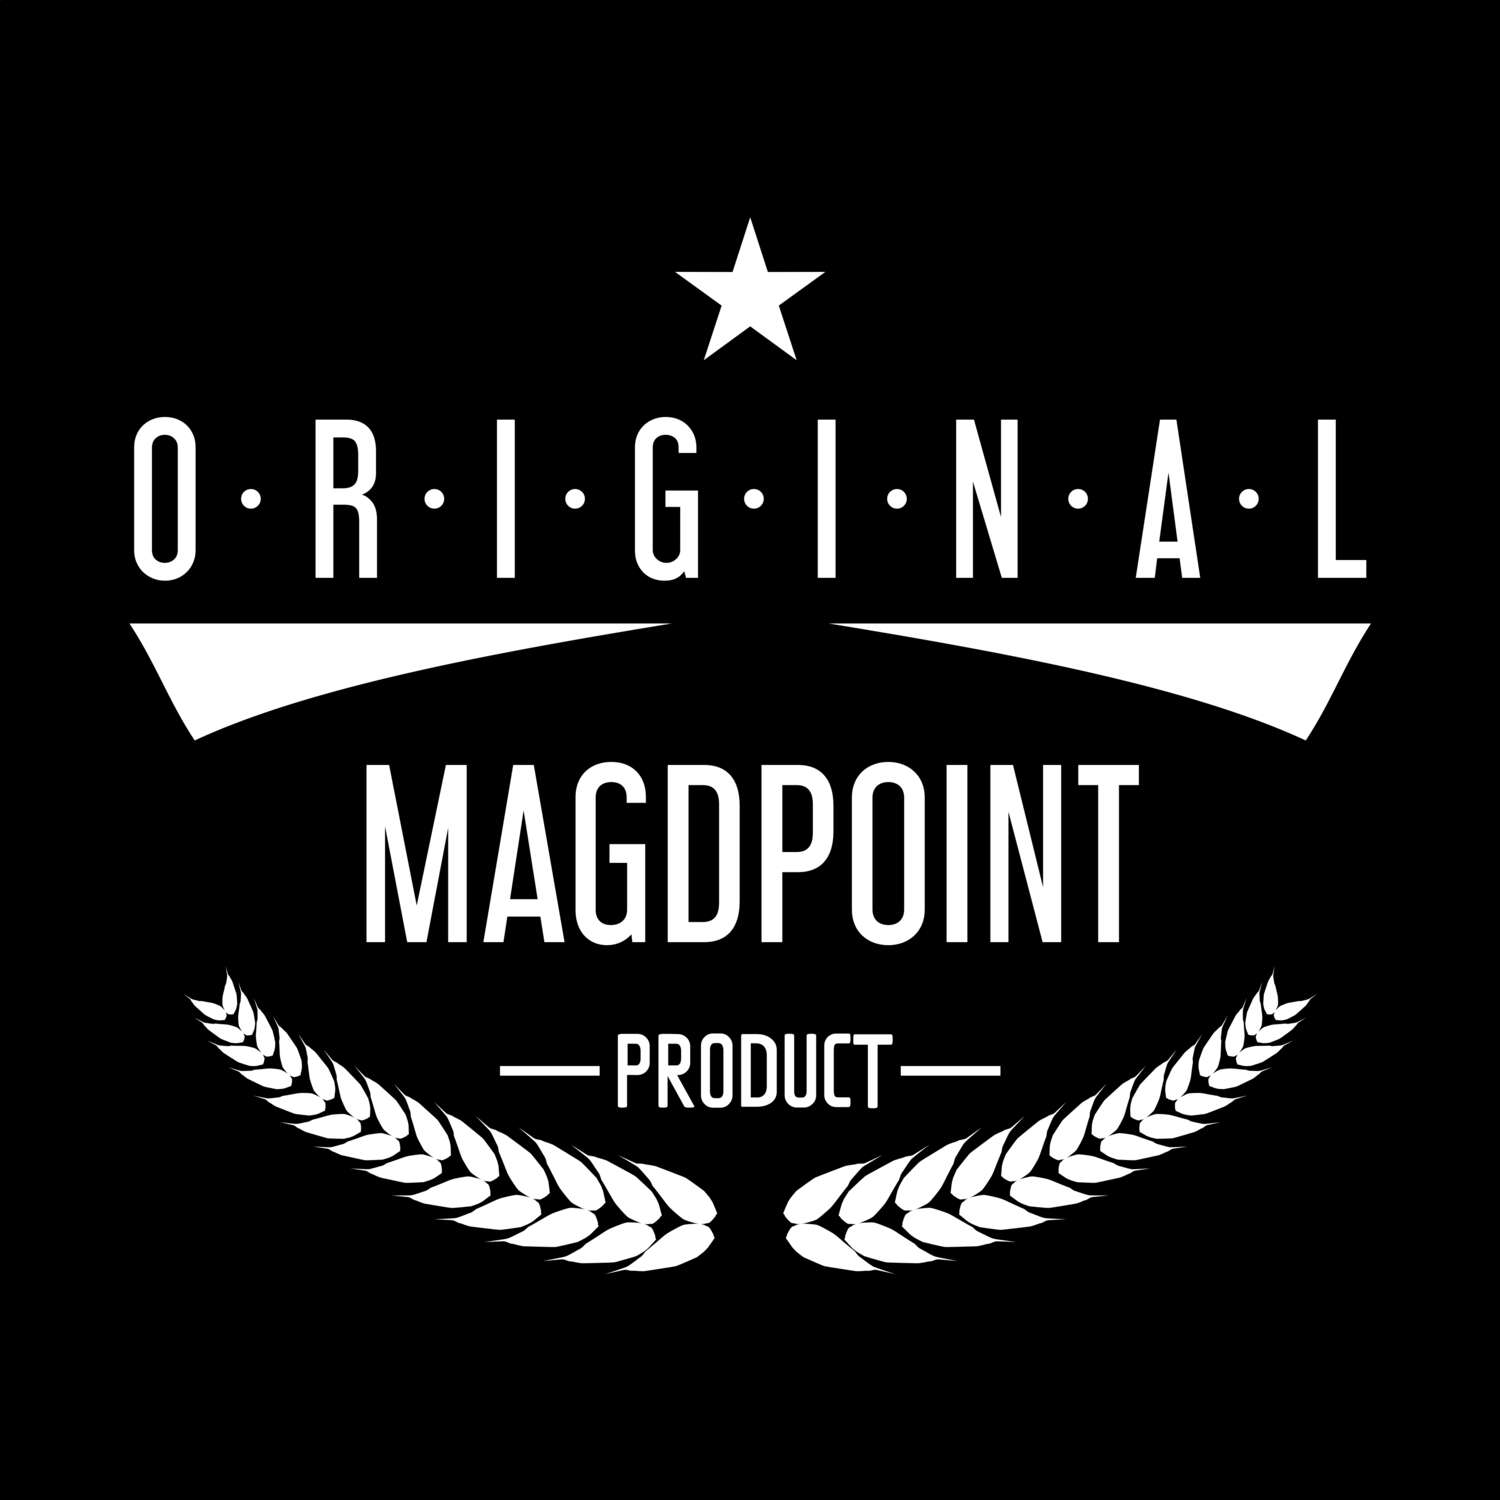 Magdpoint T-Shirt »Original Product«